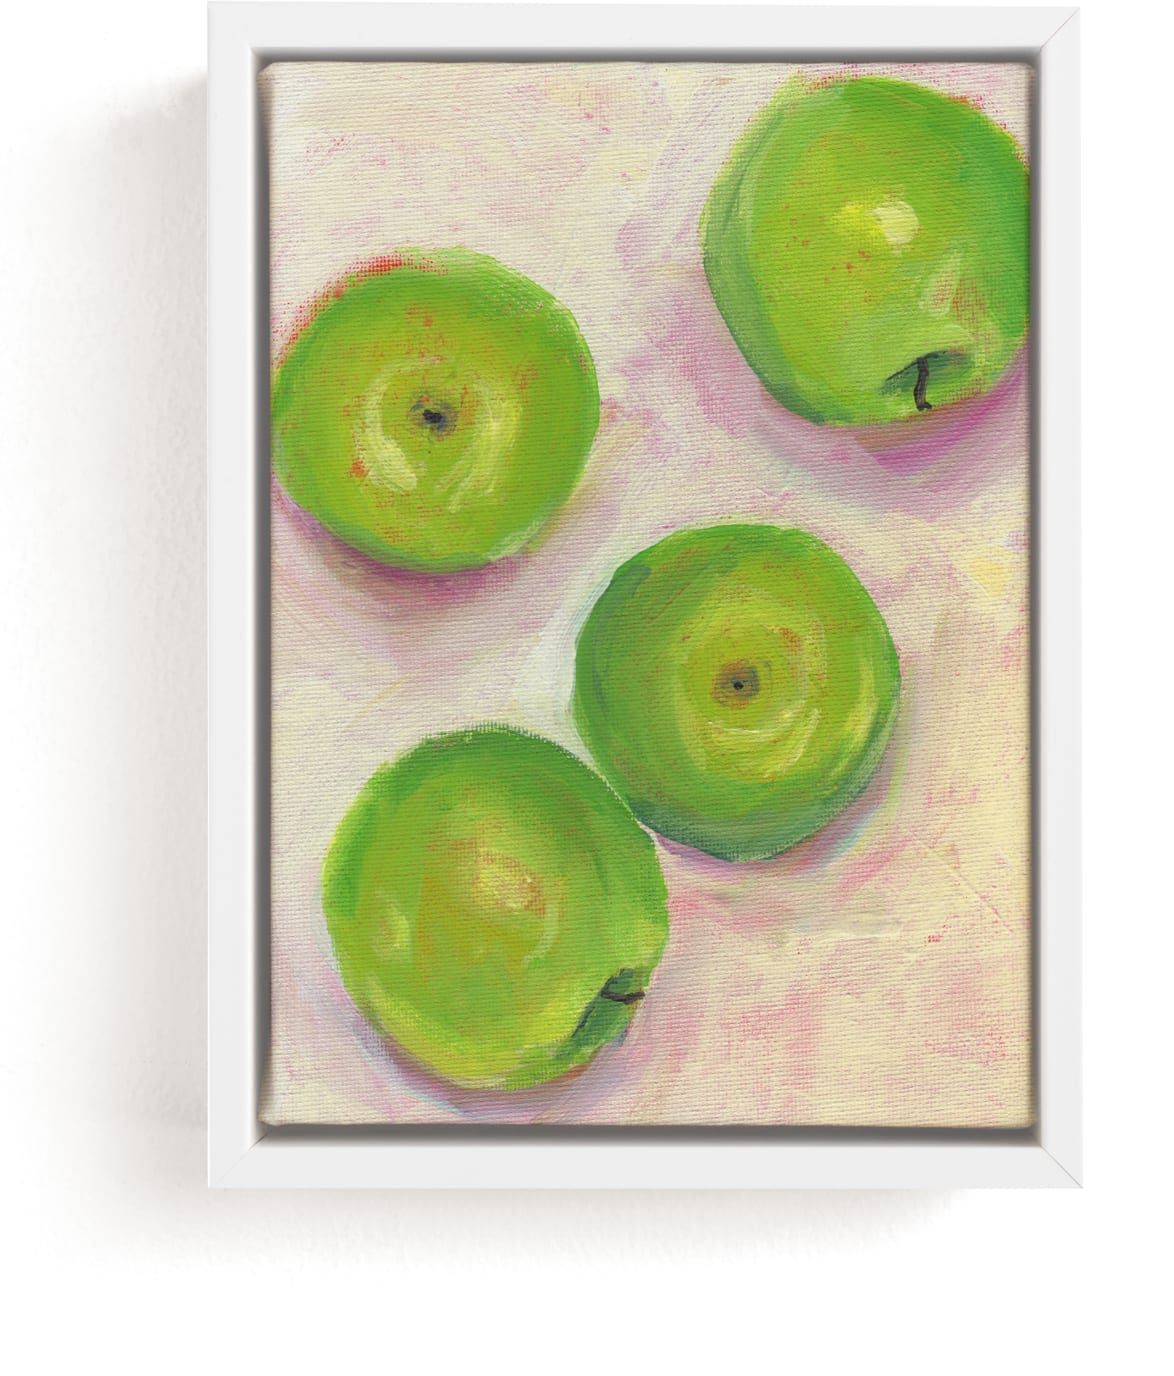 This is a ivory art by Lindsay Megahed called Green Apples.